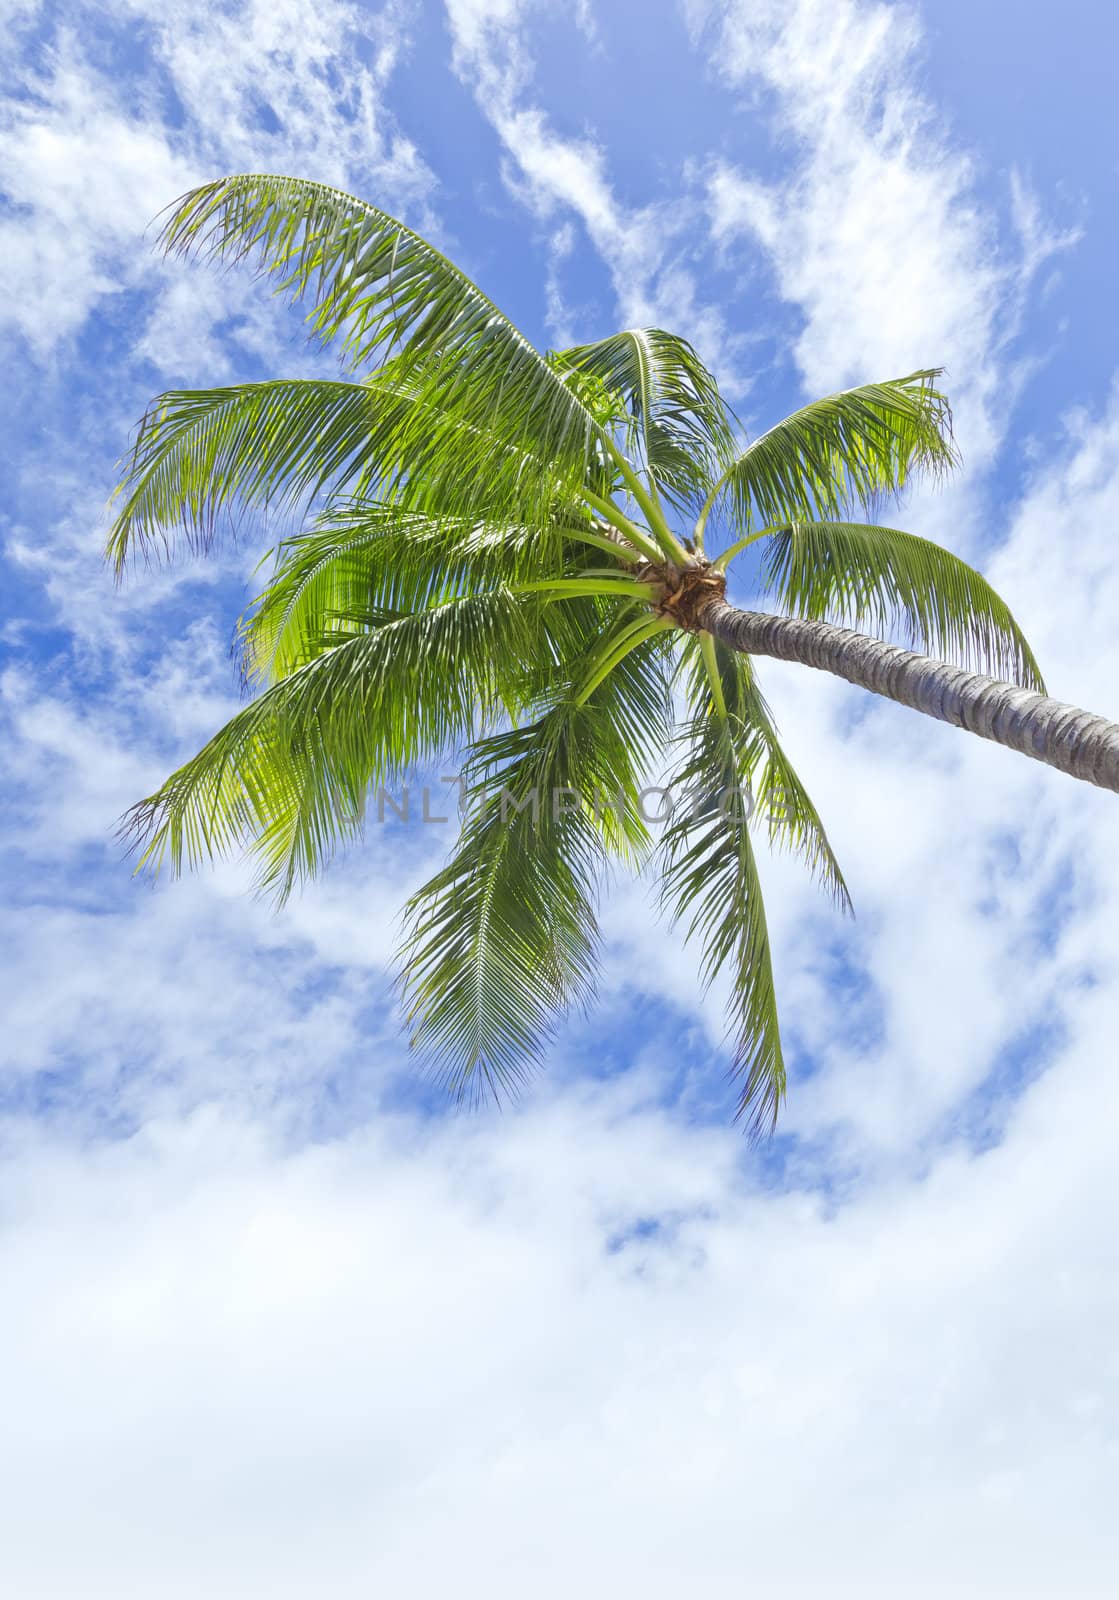 An image of a palm tree and the blue sky with white clouds